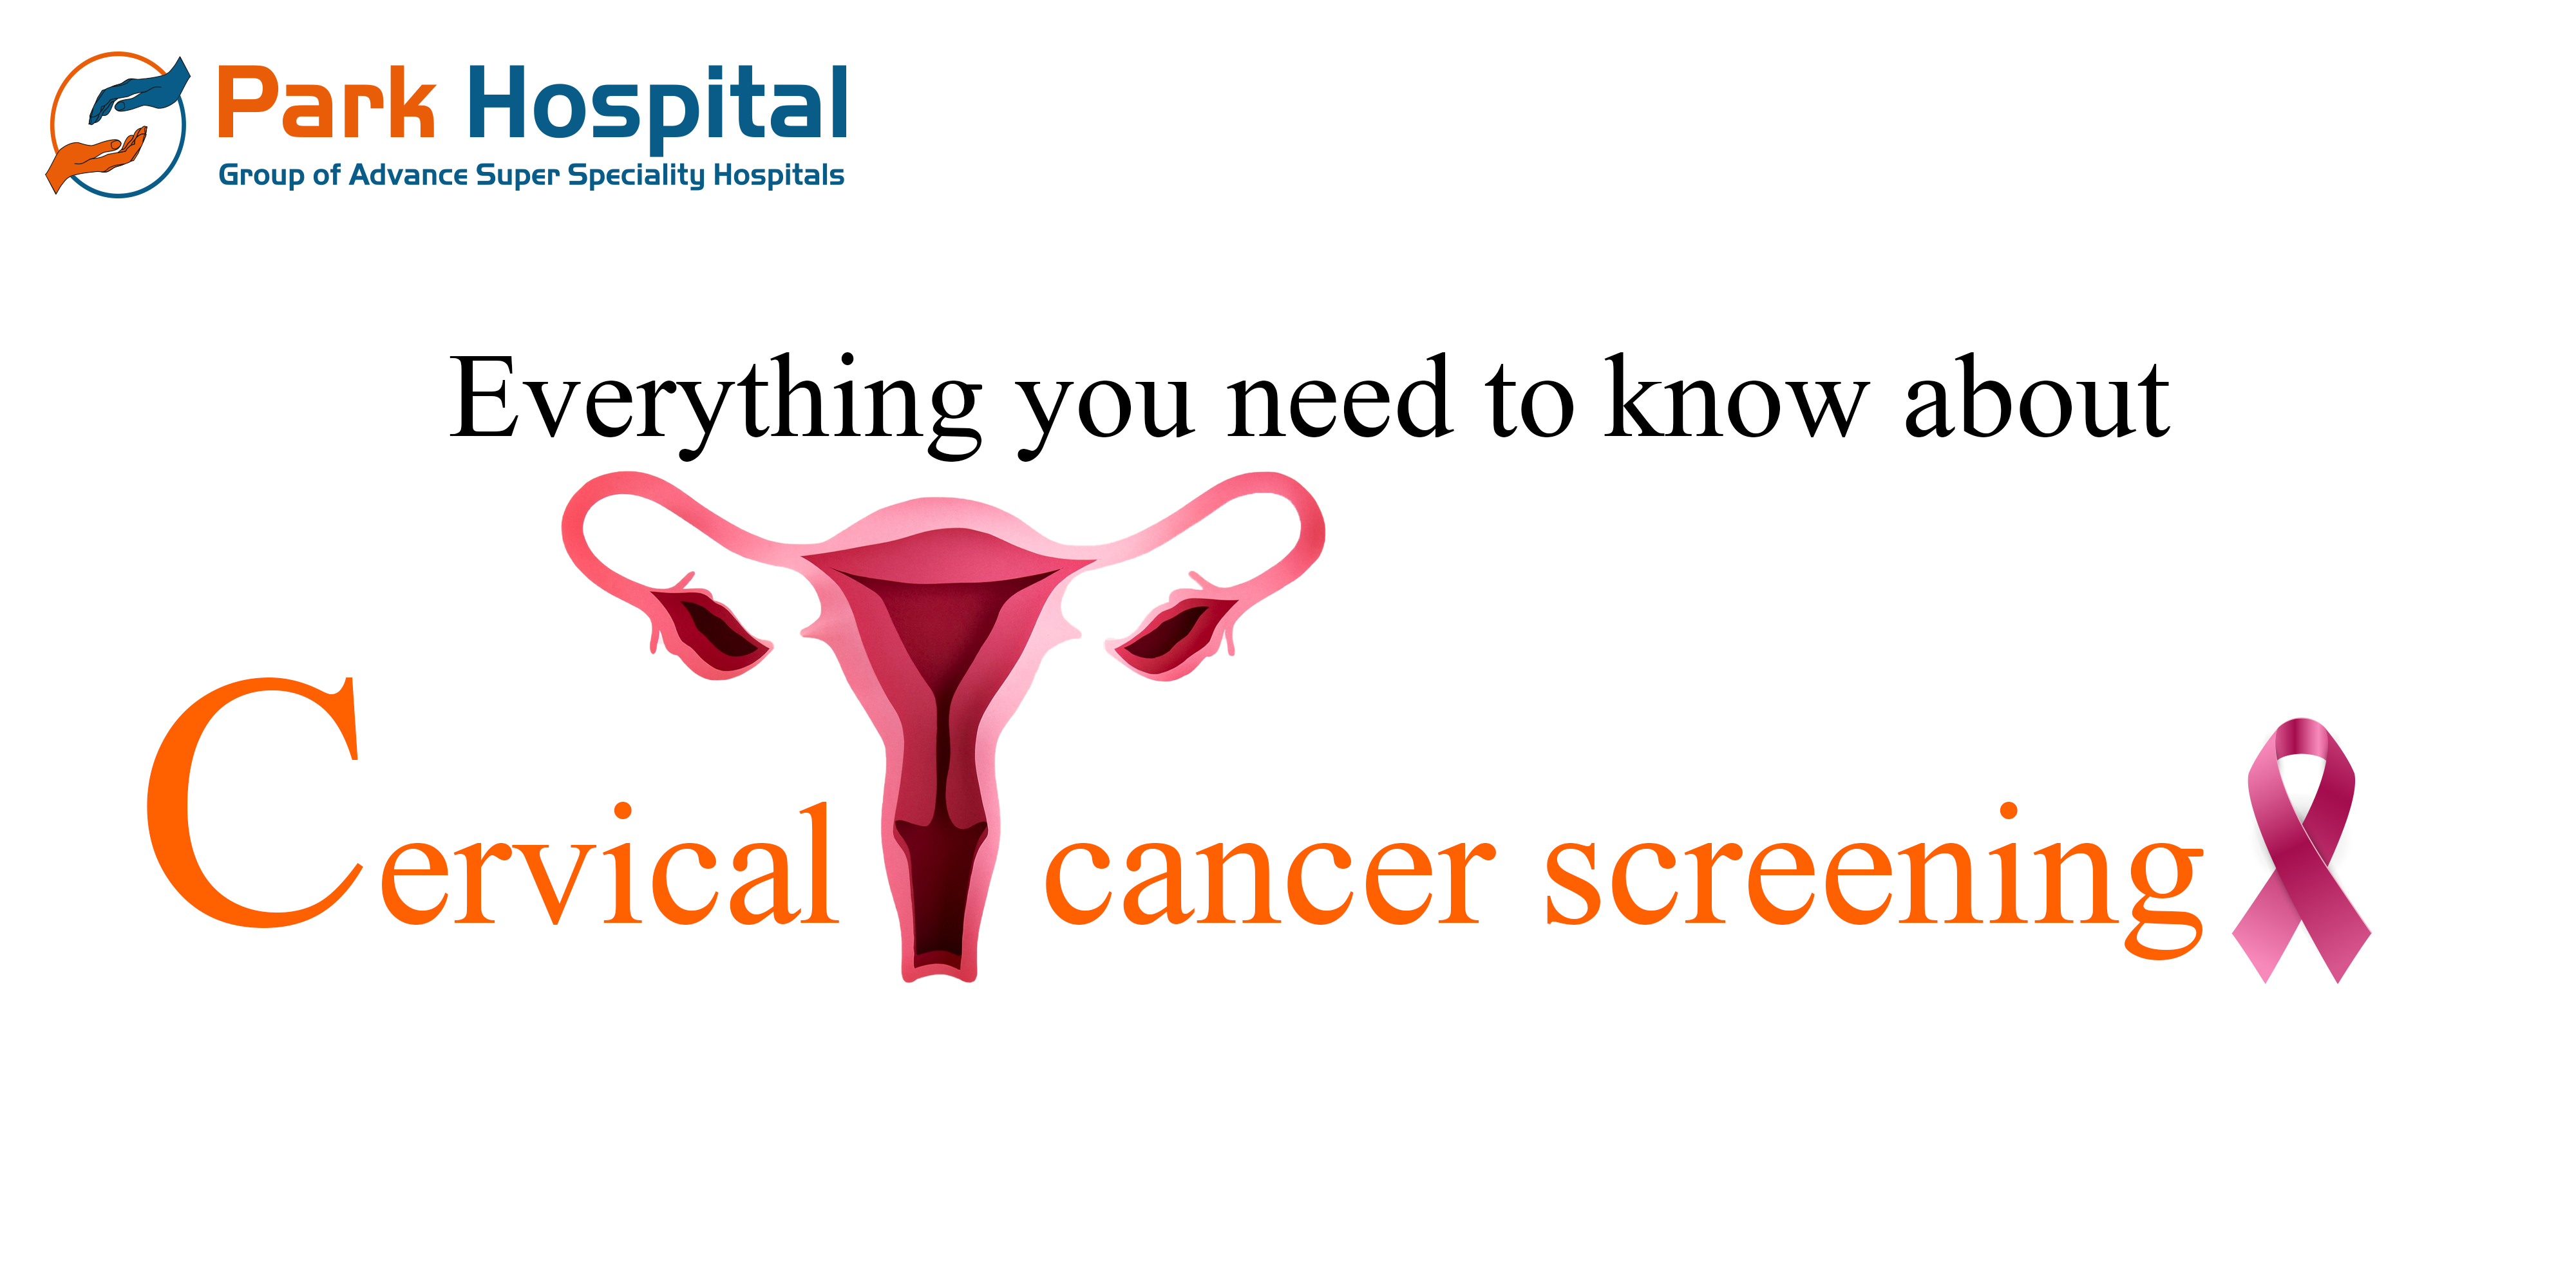 Everything You Need to Know About Cervical Cancer Screening